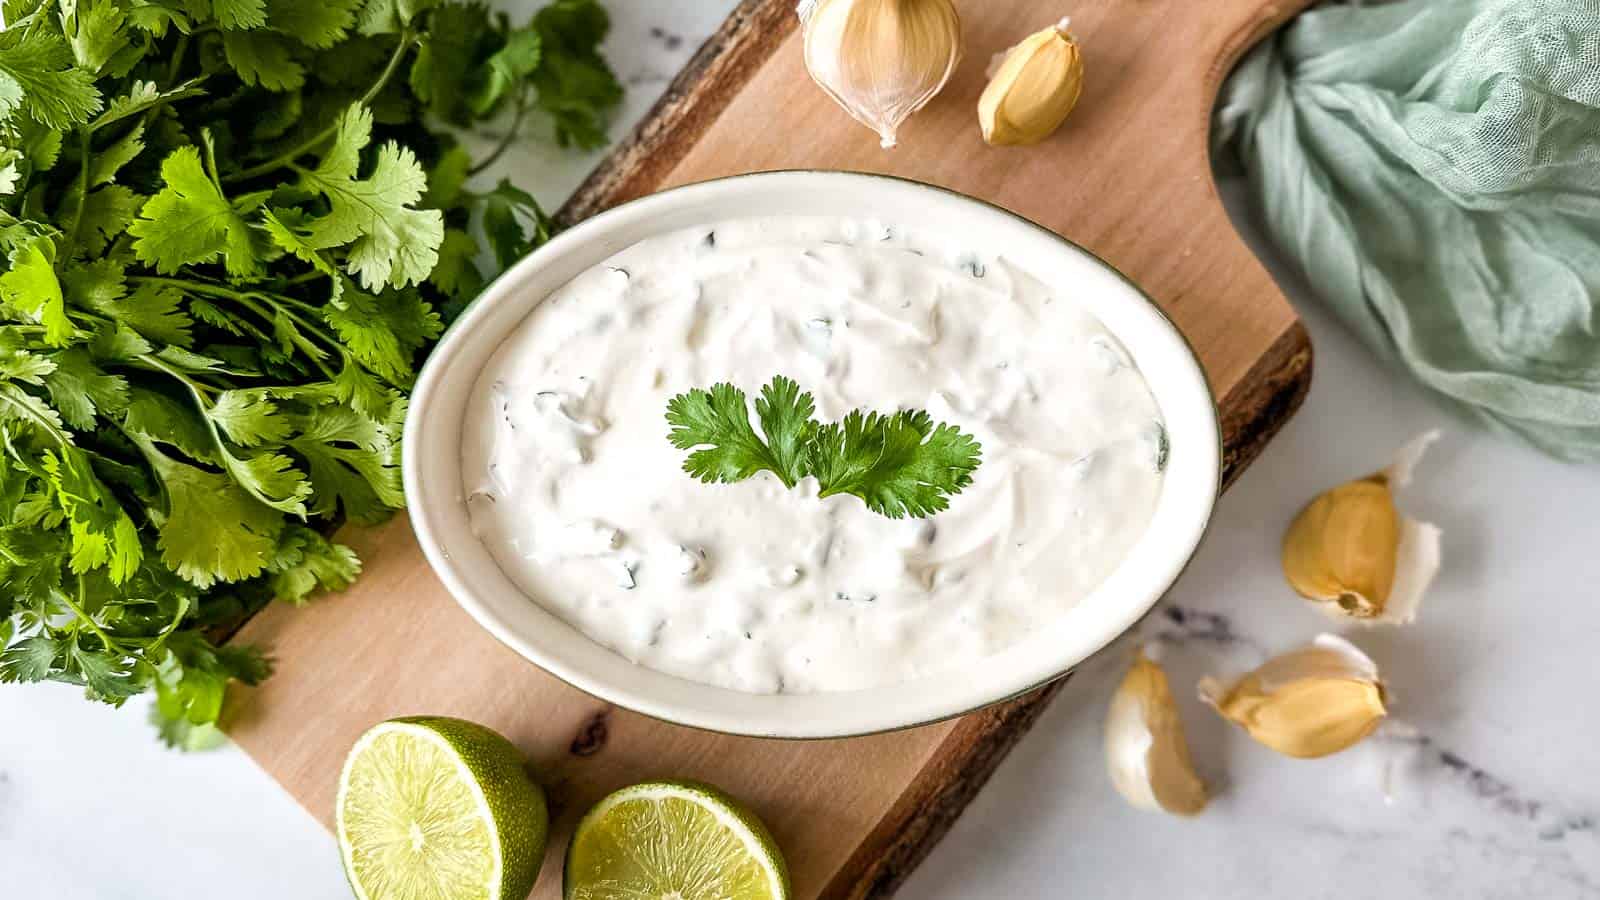 Cilantro lime crema in a white and green dish surrounded by lime halves, fresh cilantro, and garlic cloves.